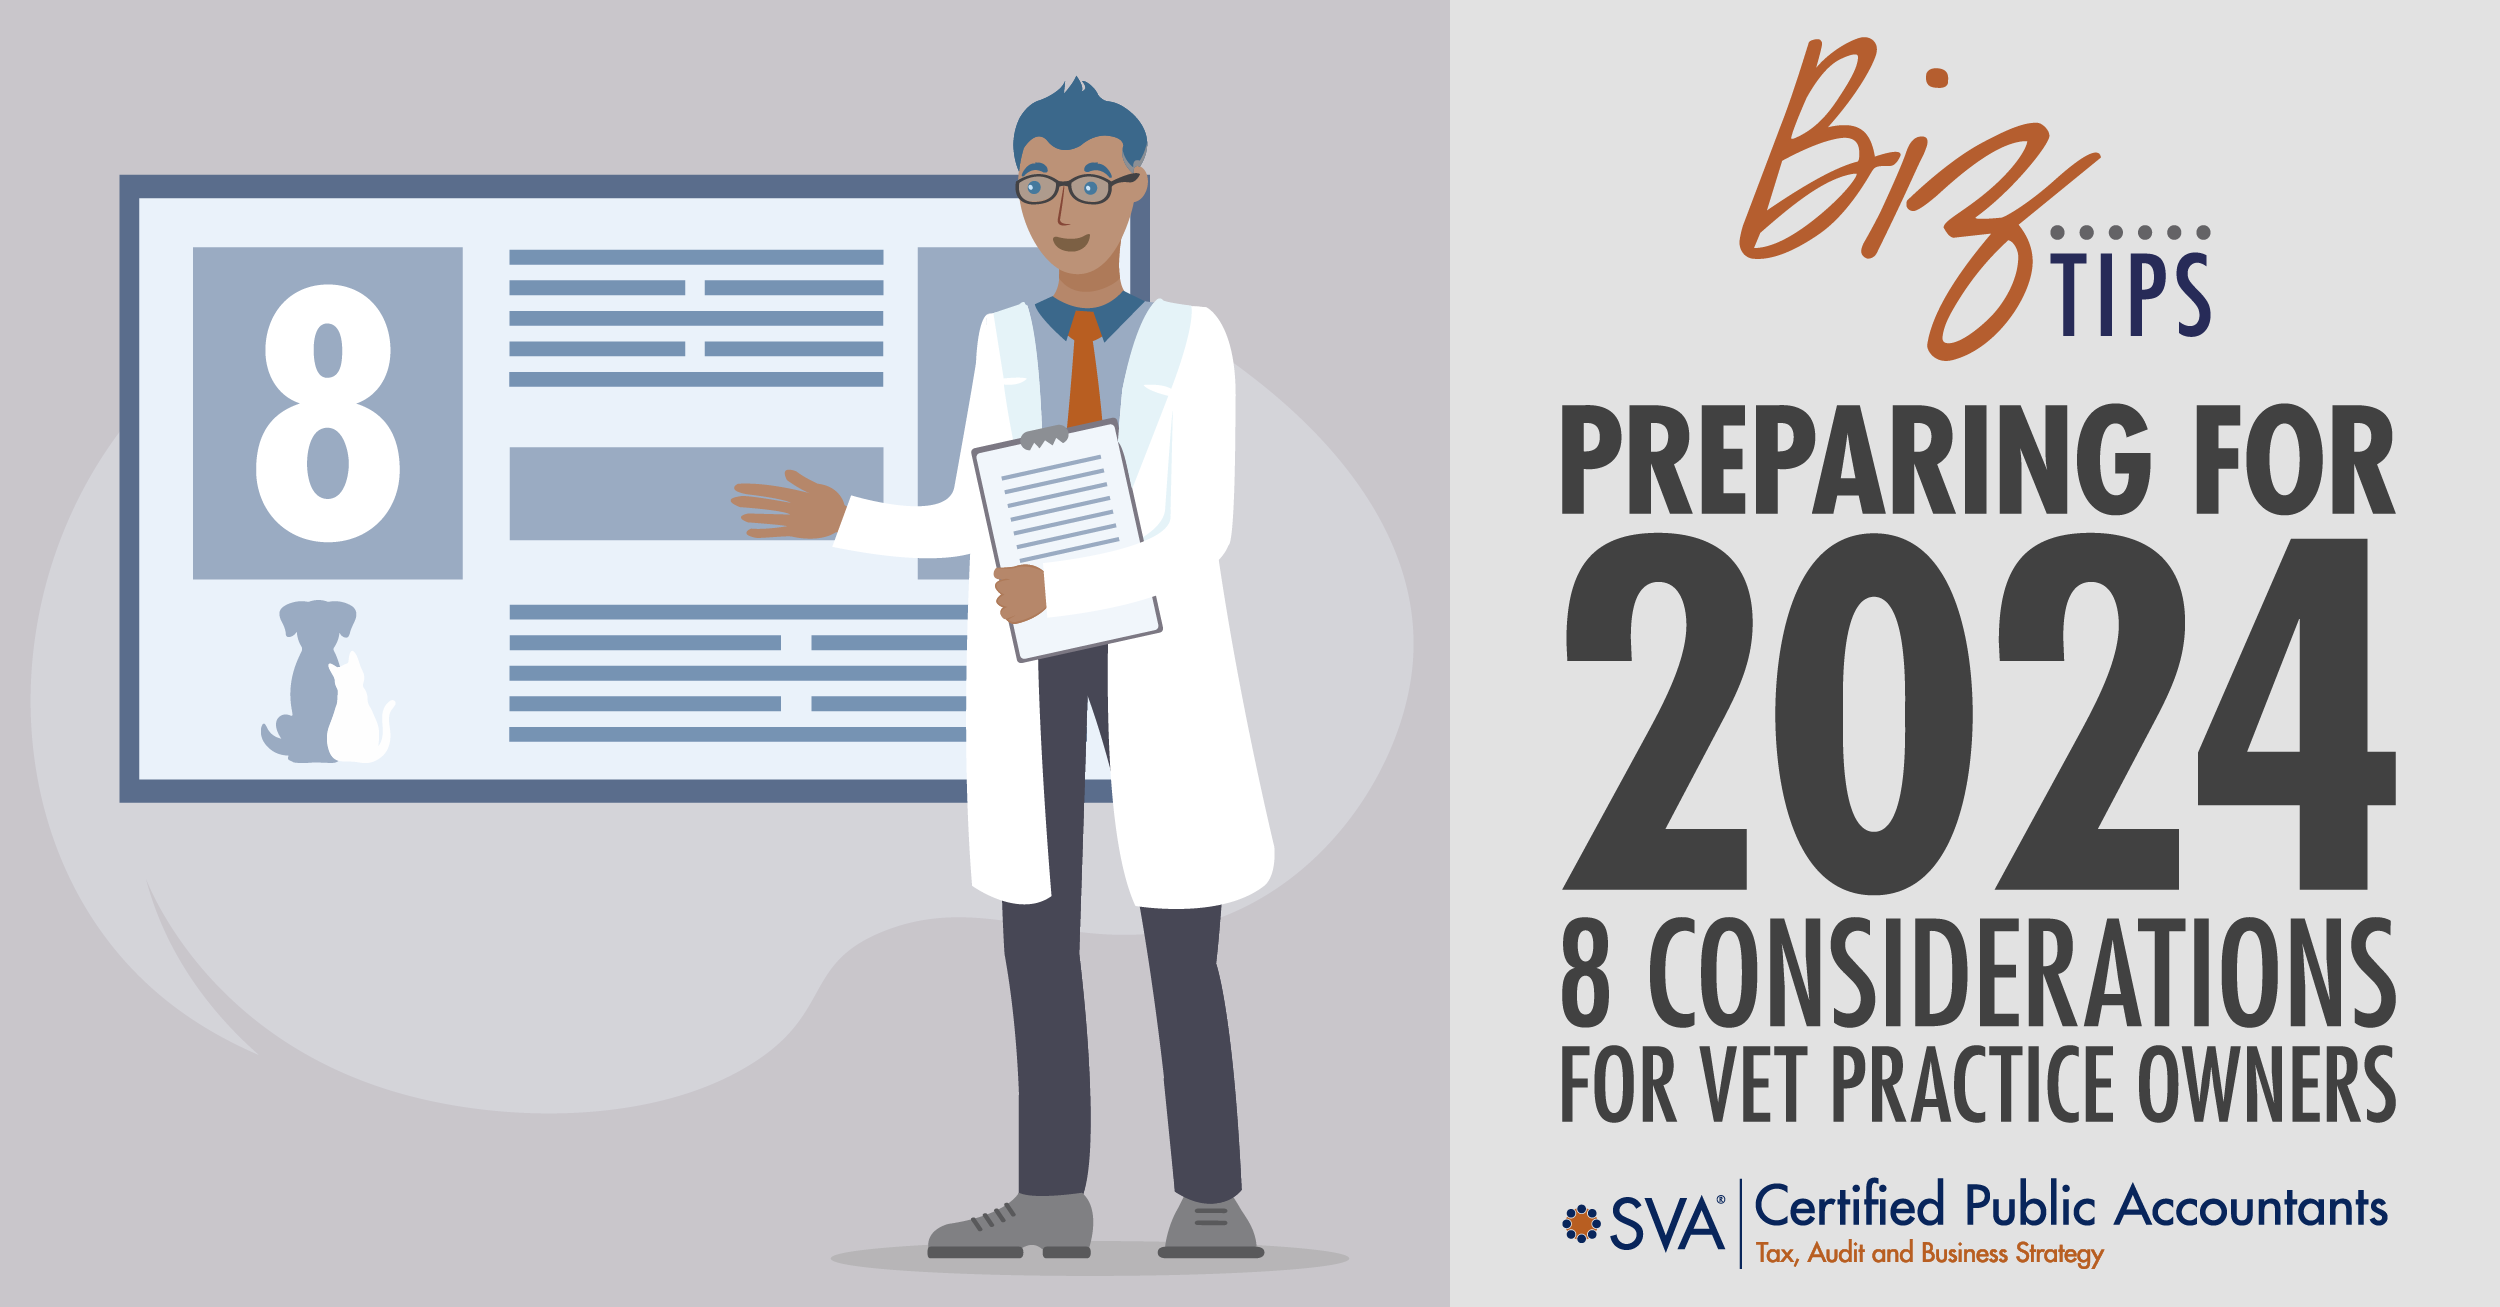 Preparing for 2024: 8 Considerations for Vet Practice Owners